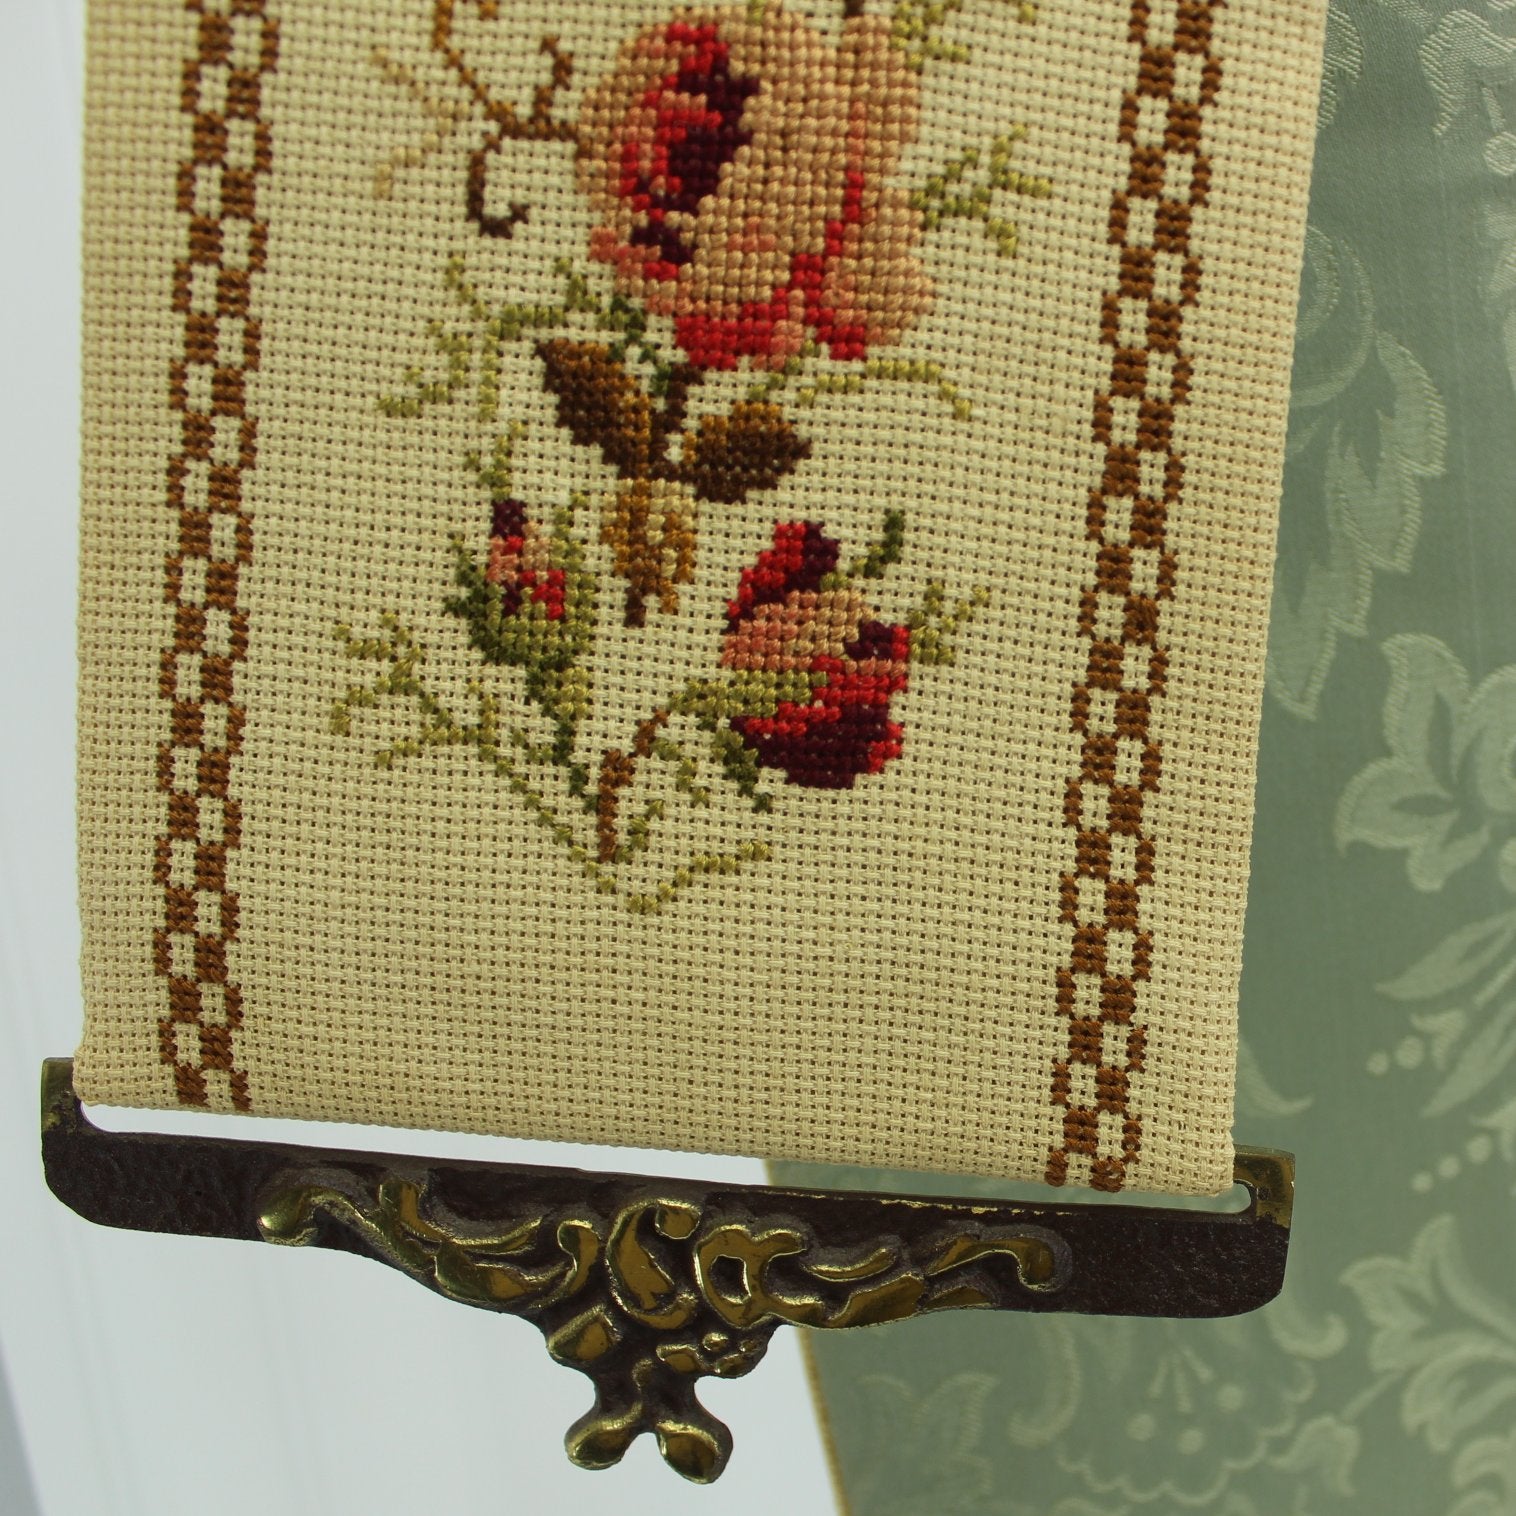 Exquisiely Hand Crafted Bell Pull Cross Stitch Roses Salmon Sienna Brown Moss Brass Hdwe closeup floral design and metal finding